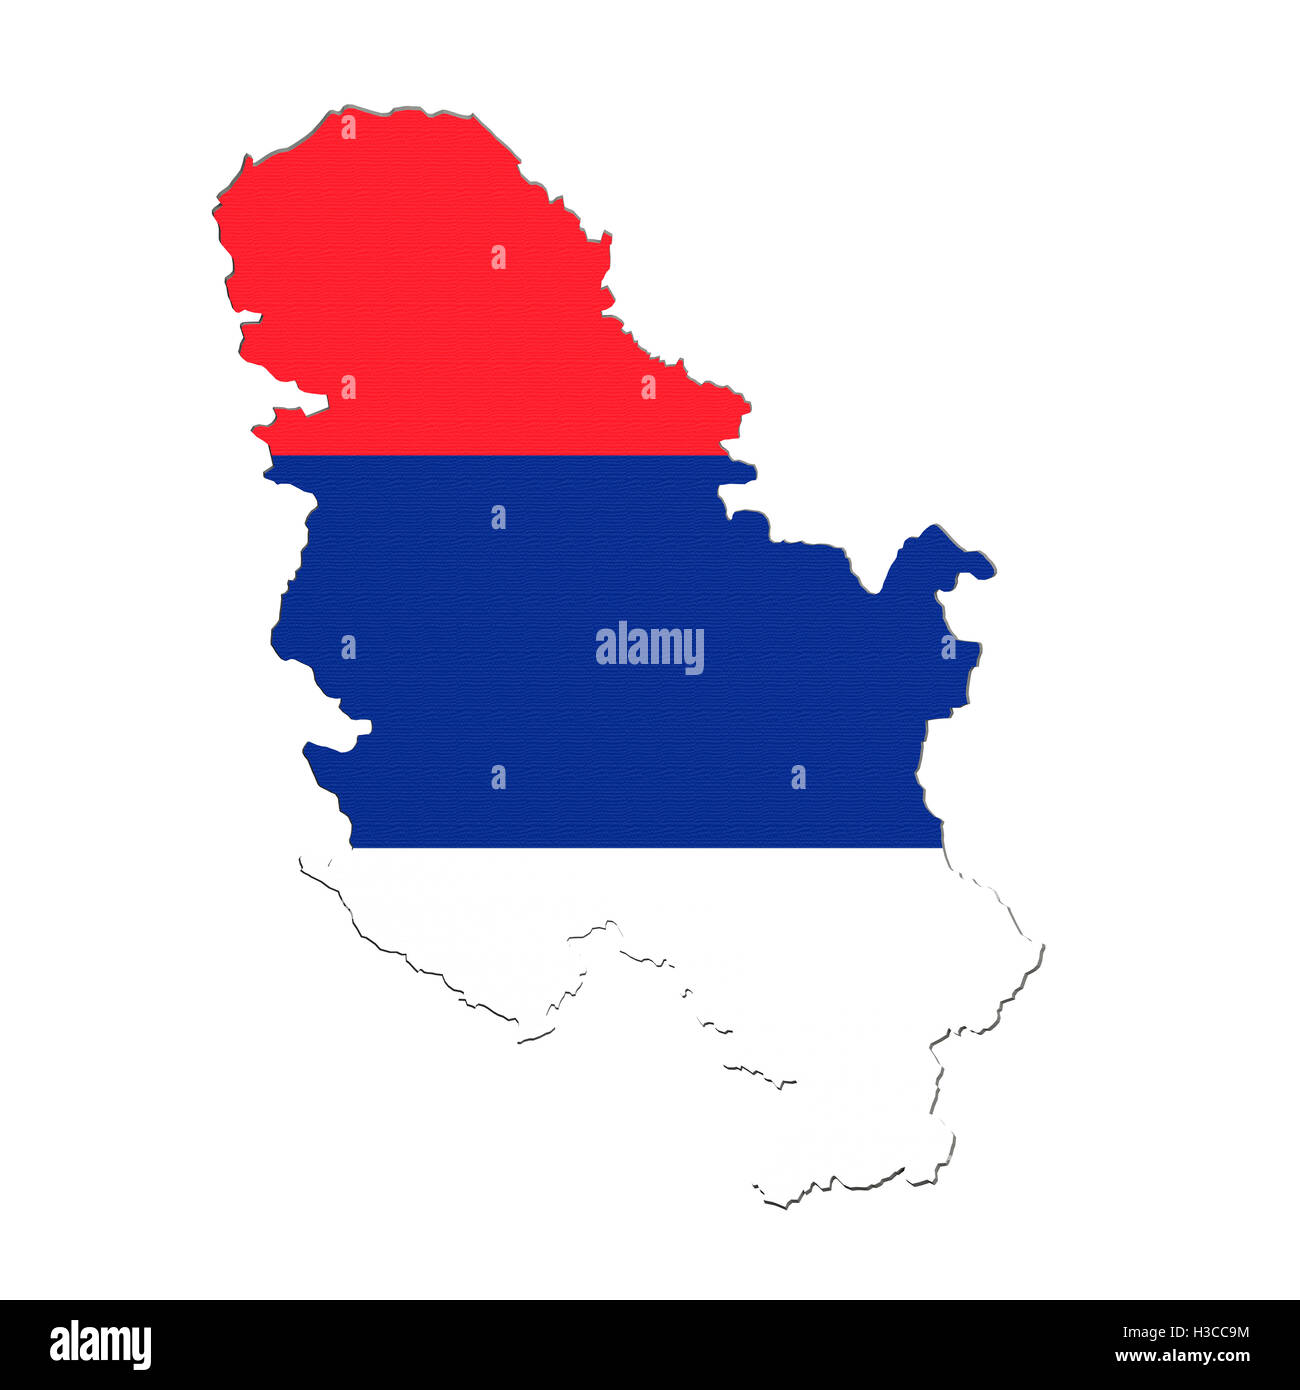 3d rendering of Serbia map and flag on white background. Stock Photo